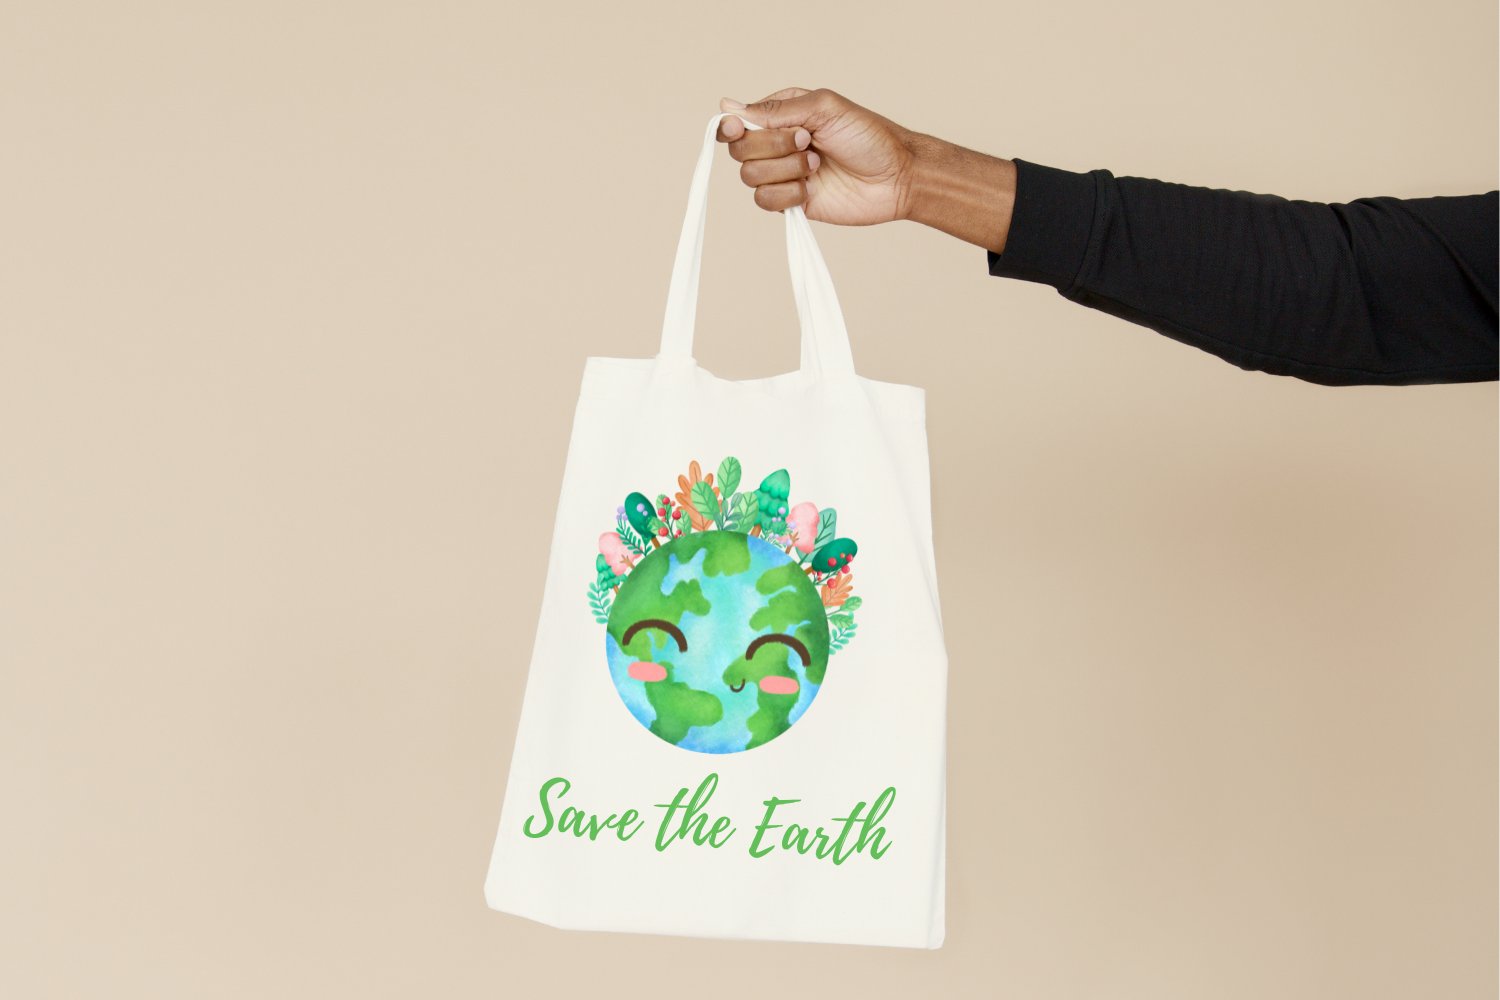 White eco bag with a planet illustration.